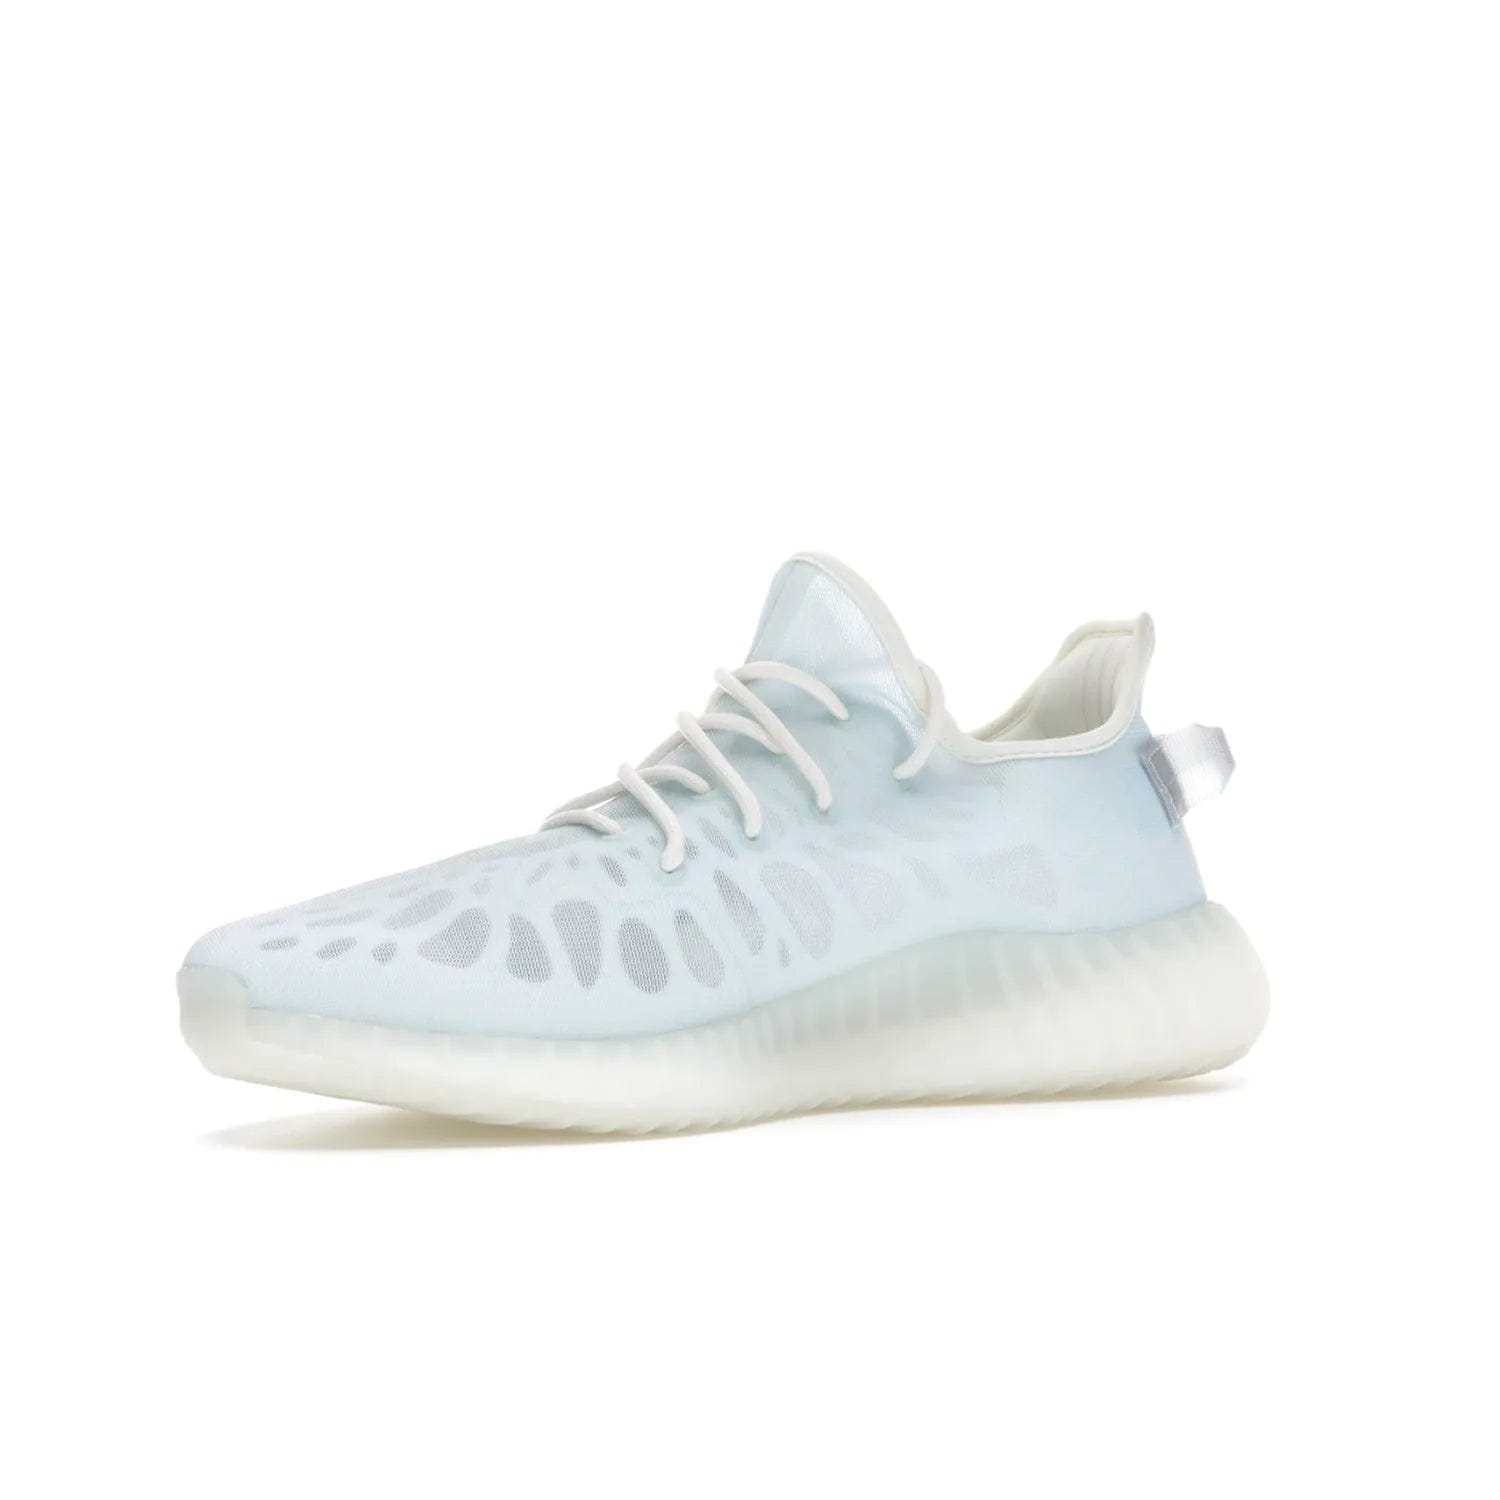 adidas Yeezy Boost 350 V2 Mono Ice - Image 16 - Only at www.BallersClubKickz.com - Introducing the adidas Yeezy 350 V2 Mono Ice - a sleek monofilament mesh design in Ice blue with Boost sole and heel pull tab. Released exclusively in the US for $220.